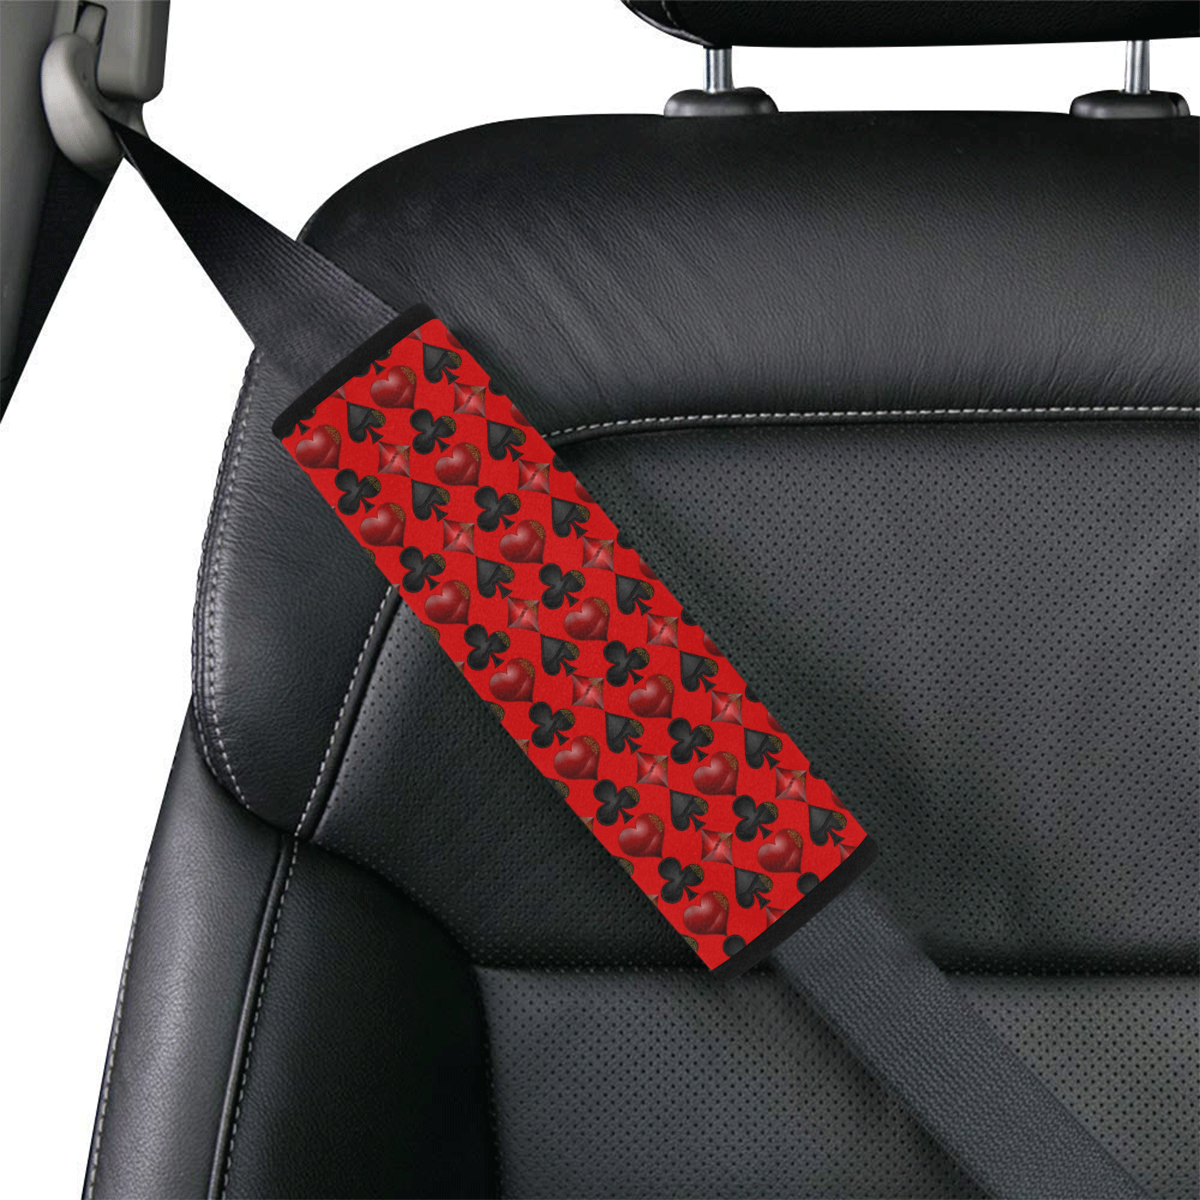 Las Vegas Black and Red Casino Poker Card Shapes on Red Car Seat Belt Cover 7''x8.5''